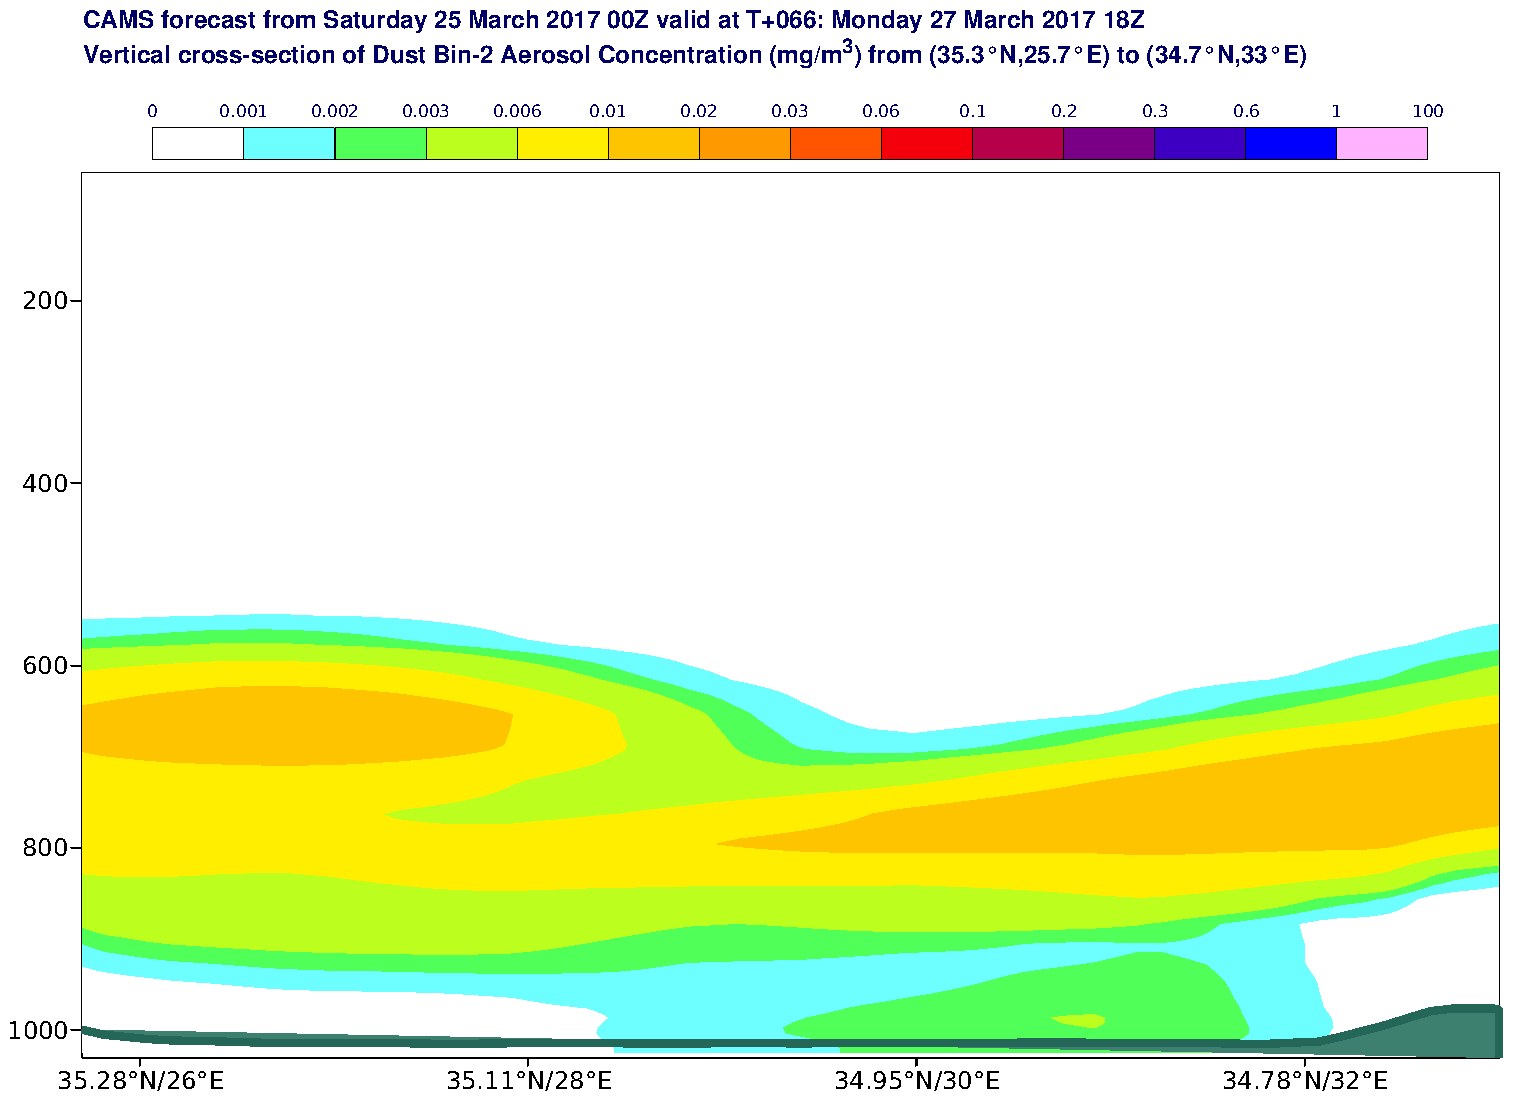 Vertical cross-section of Dust Bin-2 Aerosol Concentration (mg/m3) valid at T66 - 2017-03-27 18:00